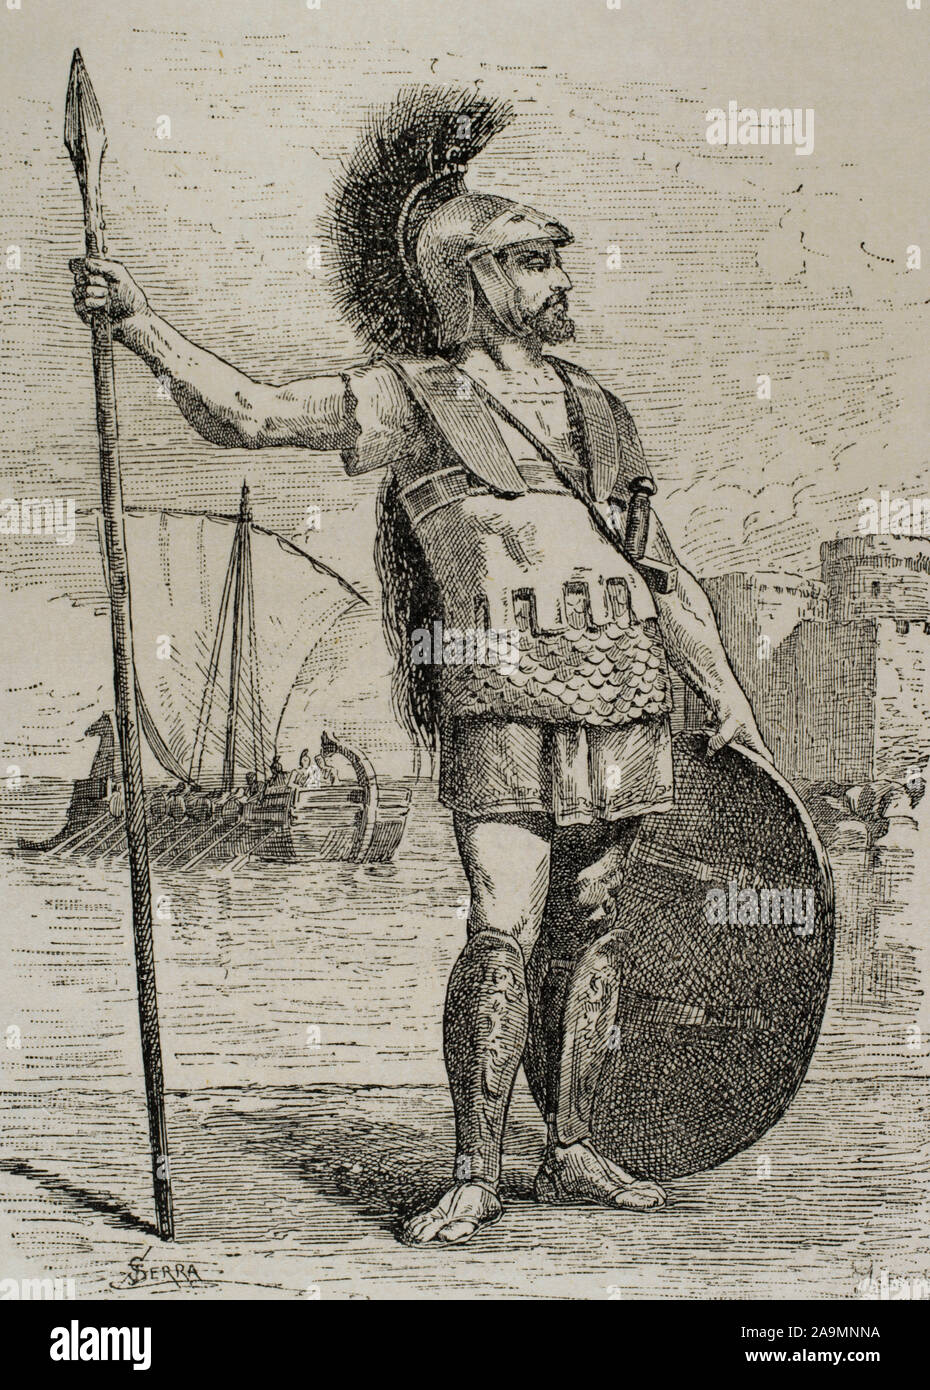 Carthaginian soldier. Engraving by Serra. Museo Militar, 1883. Stock Photo